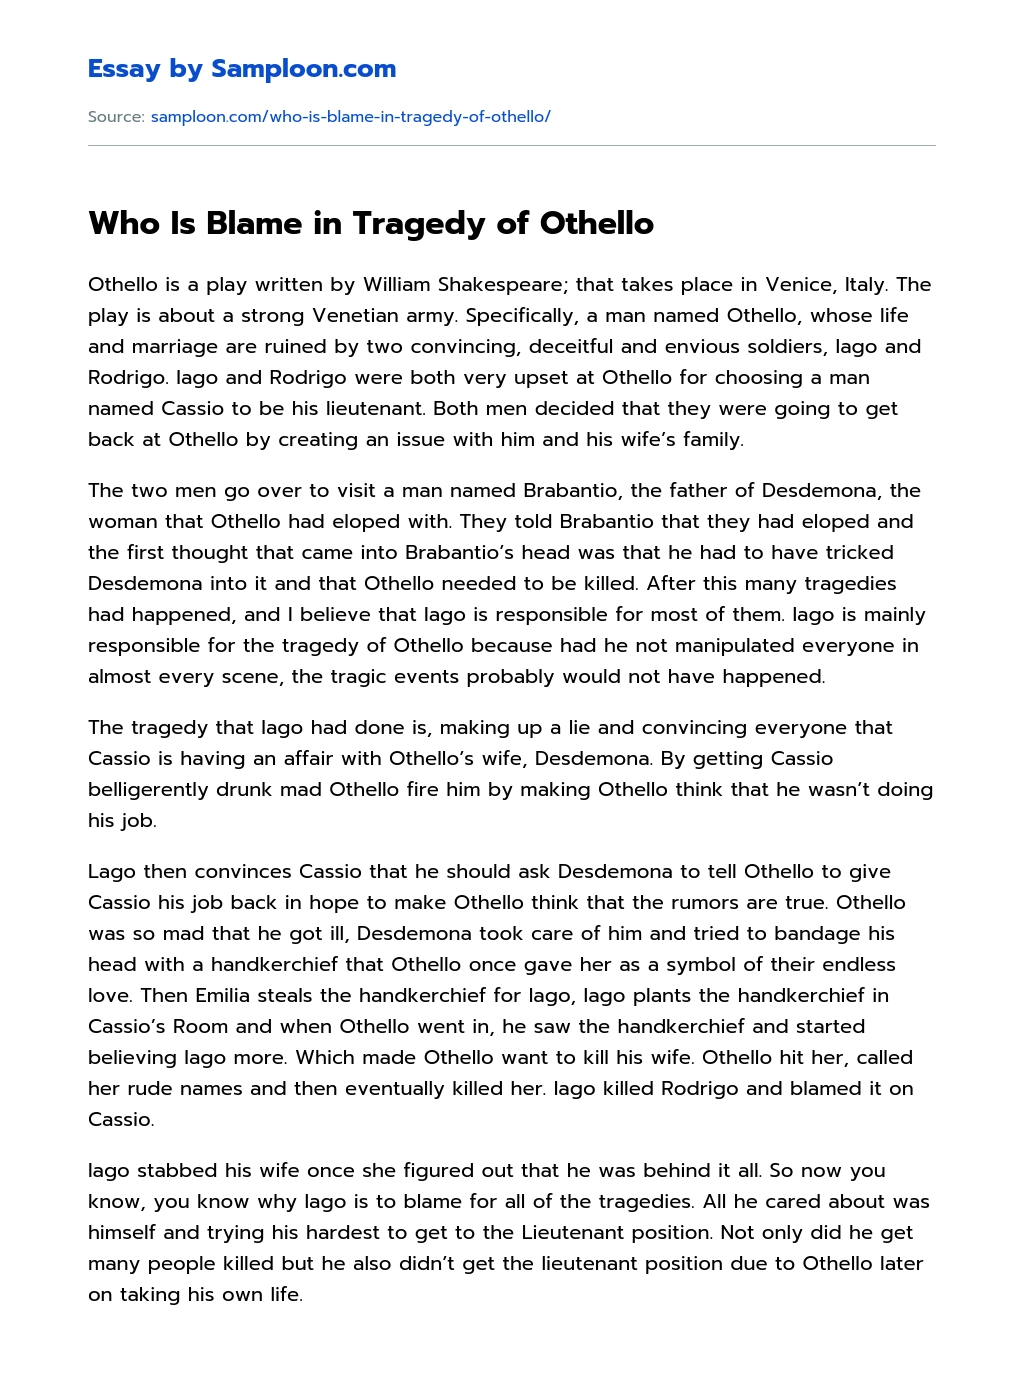 Who Is Blame in Tragedy of Othello essay